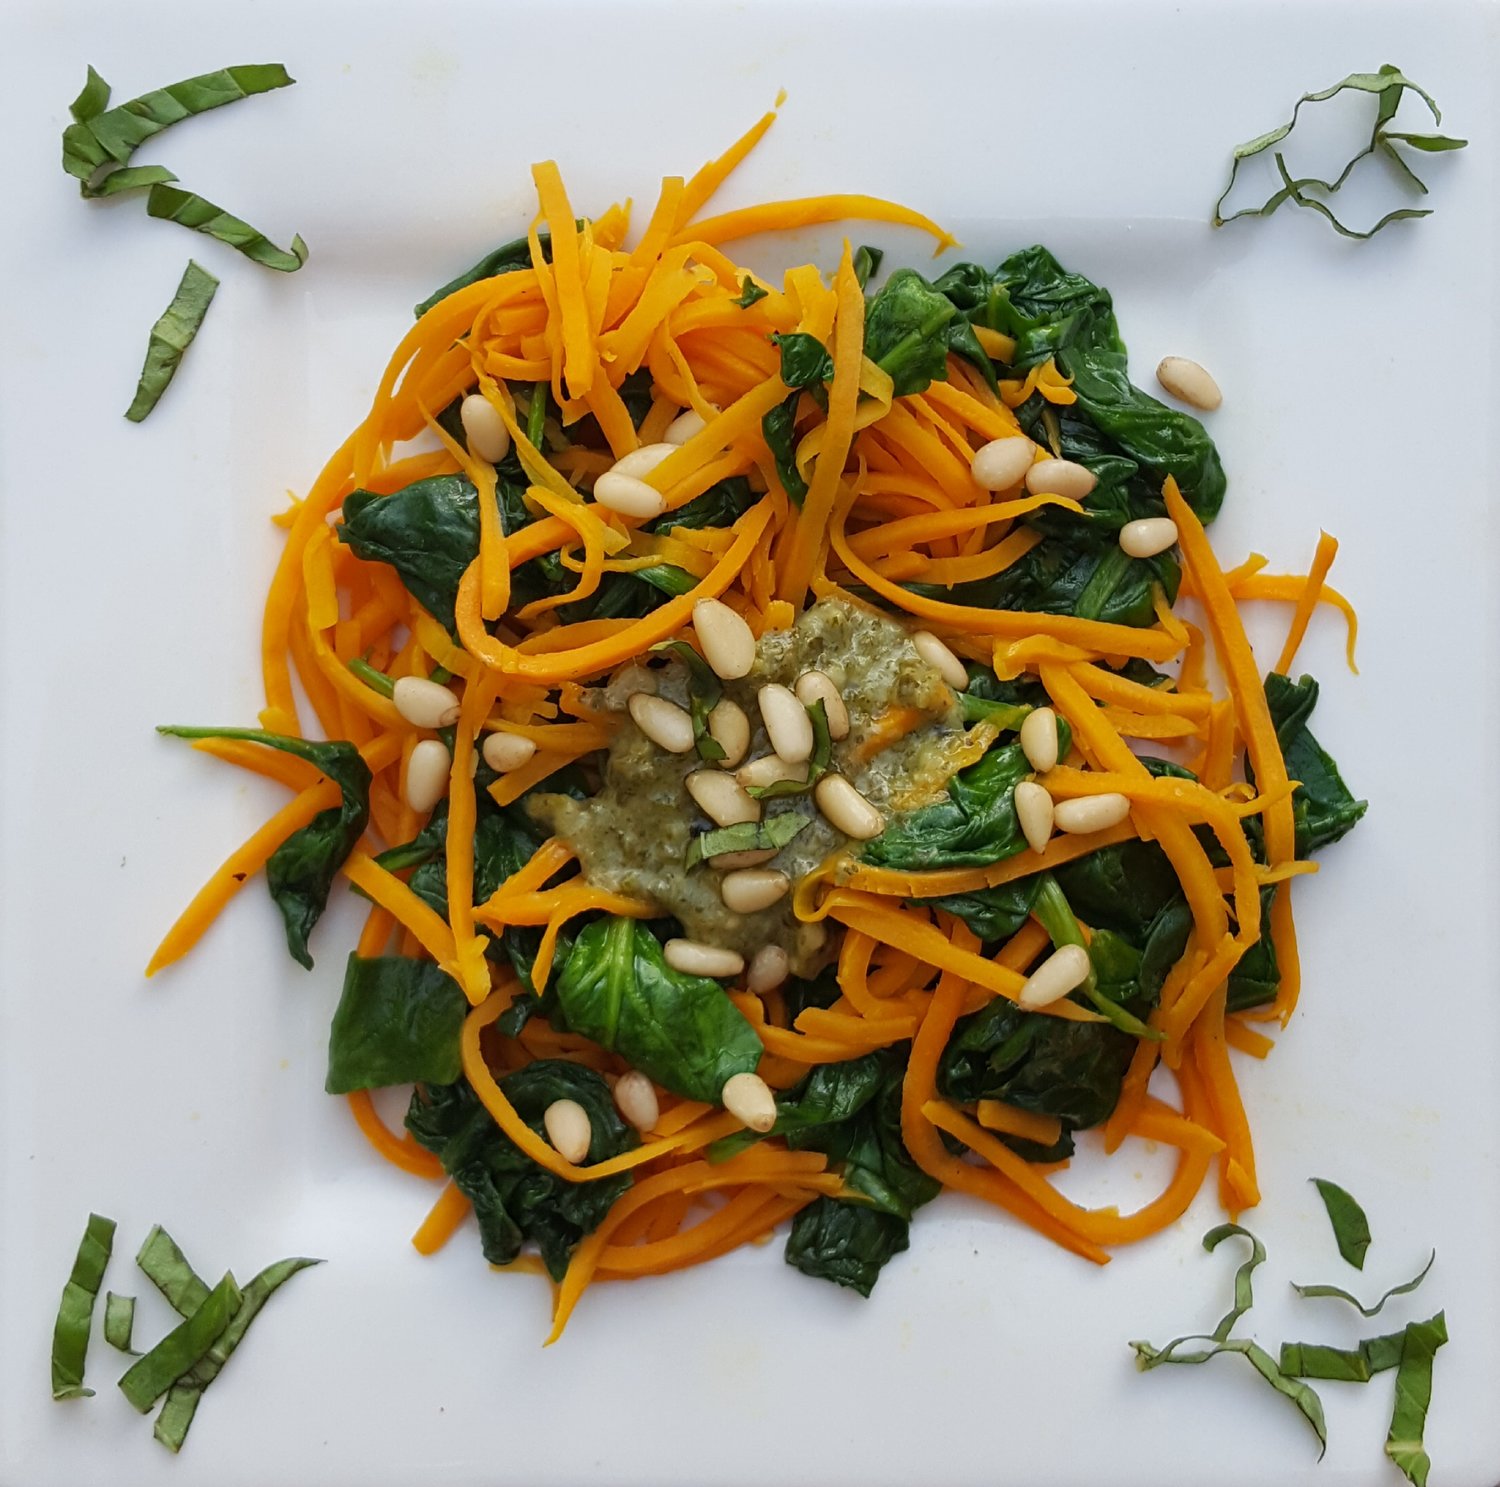 Sweet Potatoes with Spinach, Pesto, and Pine Nuts